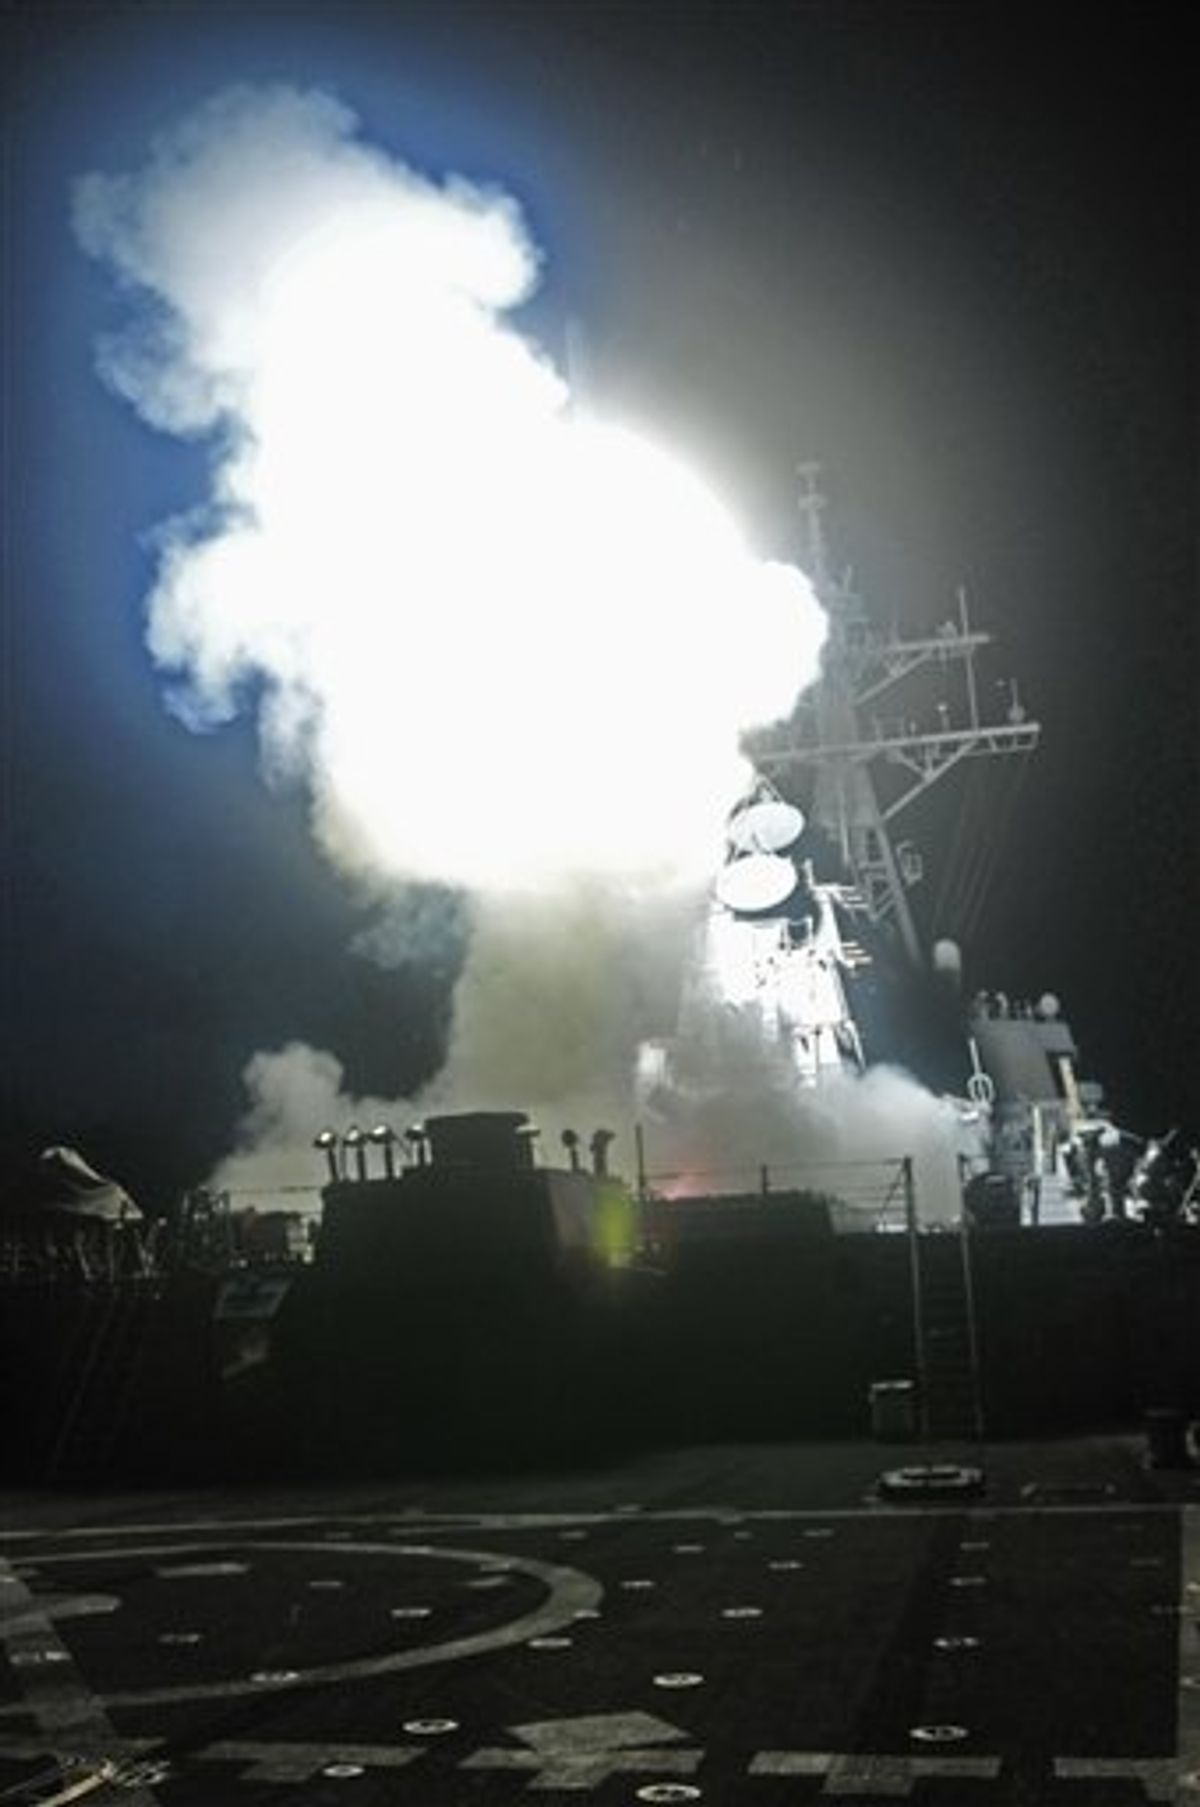 This Saturday, March 19, 2011 photo provided by the U.S. Navy shows the Arleigh Burke-class guided-missile destroyer USS Barry (DDG 52) as it launches a Tomahawk missile in support of Operation Odyssey Dawn from the Mediterranean Sea . The U.S. fired more than 100 cruise missiles from the sea while French fighter jets targeted Moammar Gadhafi's forces from the air on Saturday, launching the broadest international military effort since the Iraq war in support of an uprising that had seemed on the verge of defeat. (AP Photo/U.S. Navy, MC3 Jonathan Sunderman) (AP)